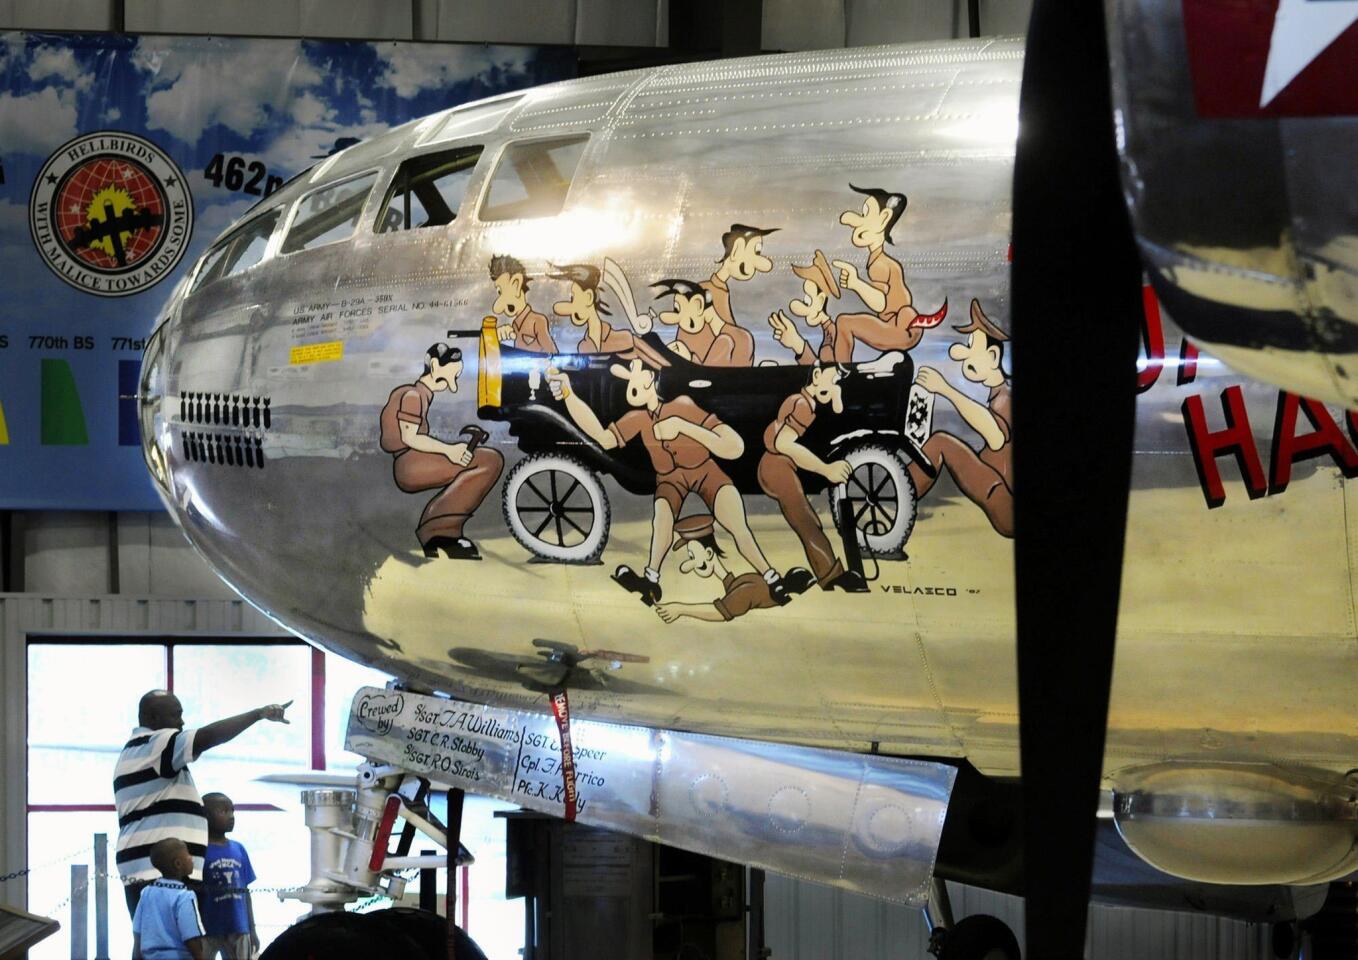 WINDSOR LOCKS 4/20/10- The 1945 Boeing B-29A Superfortress occupies it's own hangar, the 58th Bomb Wing Memorial, at the New England Air Museum. Aquired in pieces in 1973, the big bomber was later extensively damaged during the 1979 tornado that hit the area of the old air museum. For the next 20 years, the old hulk of a plane sat in an outdoor display area and became home to many birds and animals. In 1999, the restoration began, using the fuselage of three planes. The restoration is nearly complete and the shiny B-29A sits proudly inside the pristine hangar. In photo, Brian Williams of Windsor shows the plane to his sons, Kisimi, 4, and Kwane, 7, during a school vacation trip to the museum. STEPHEN DUNN|sdunn@courant.com ORG XMIT: 10014546A